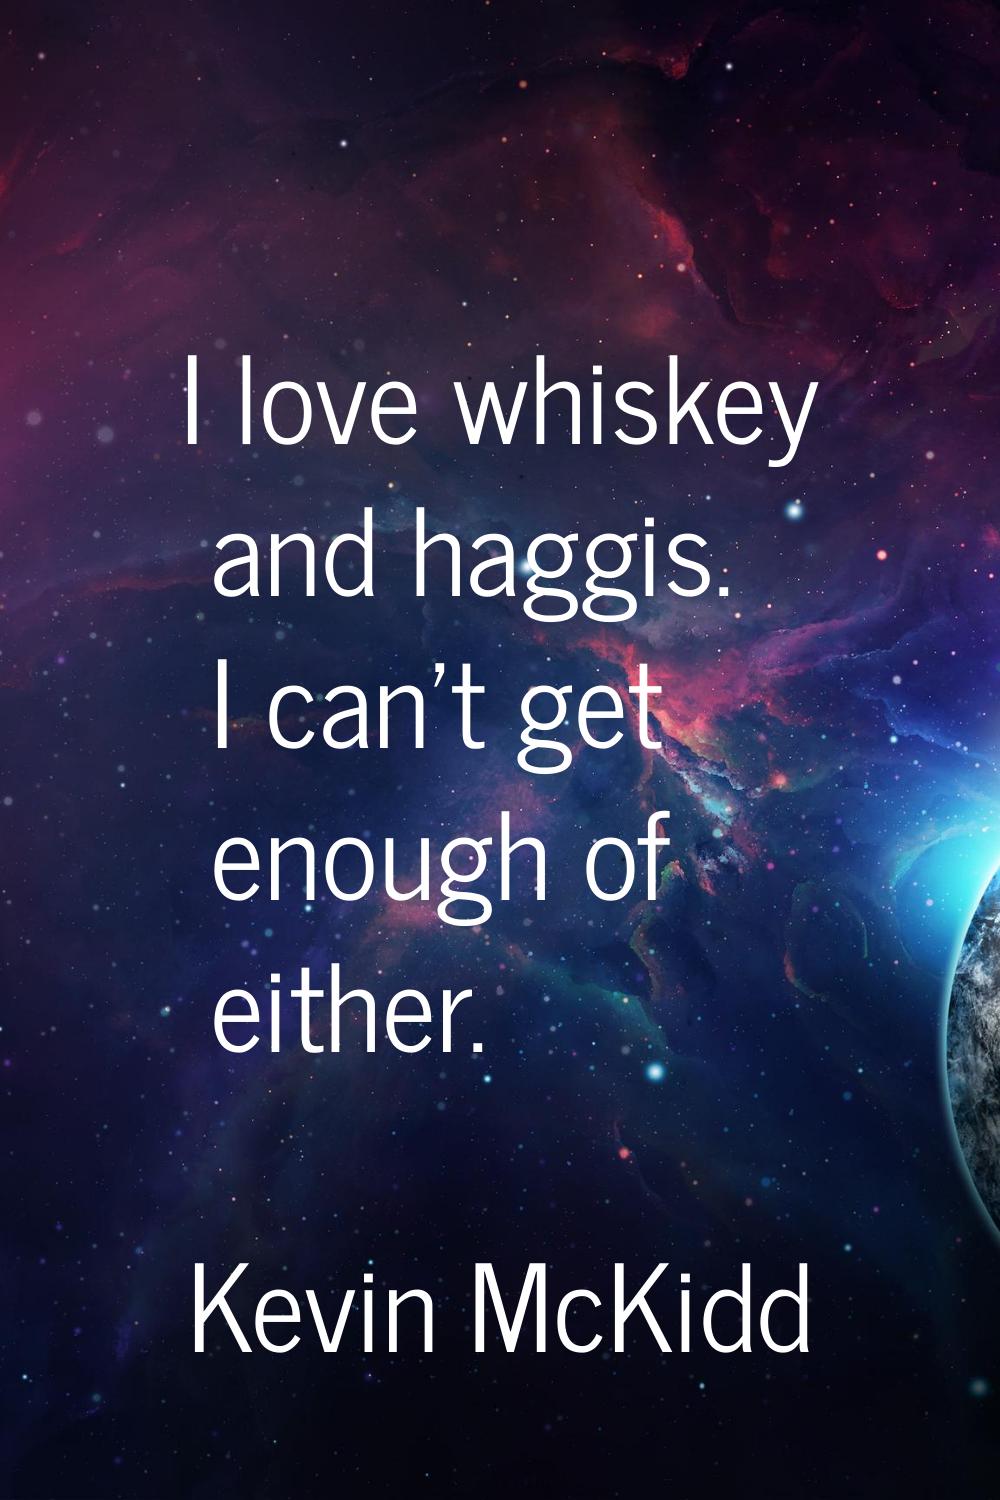 I love whiskey and haggis. I can't get enough of either.